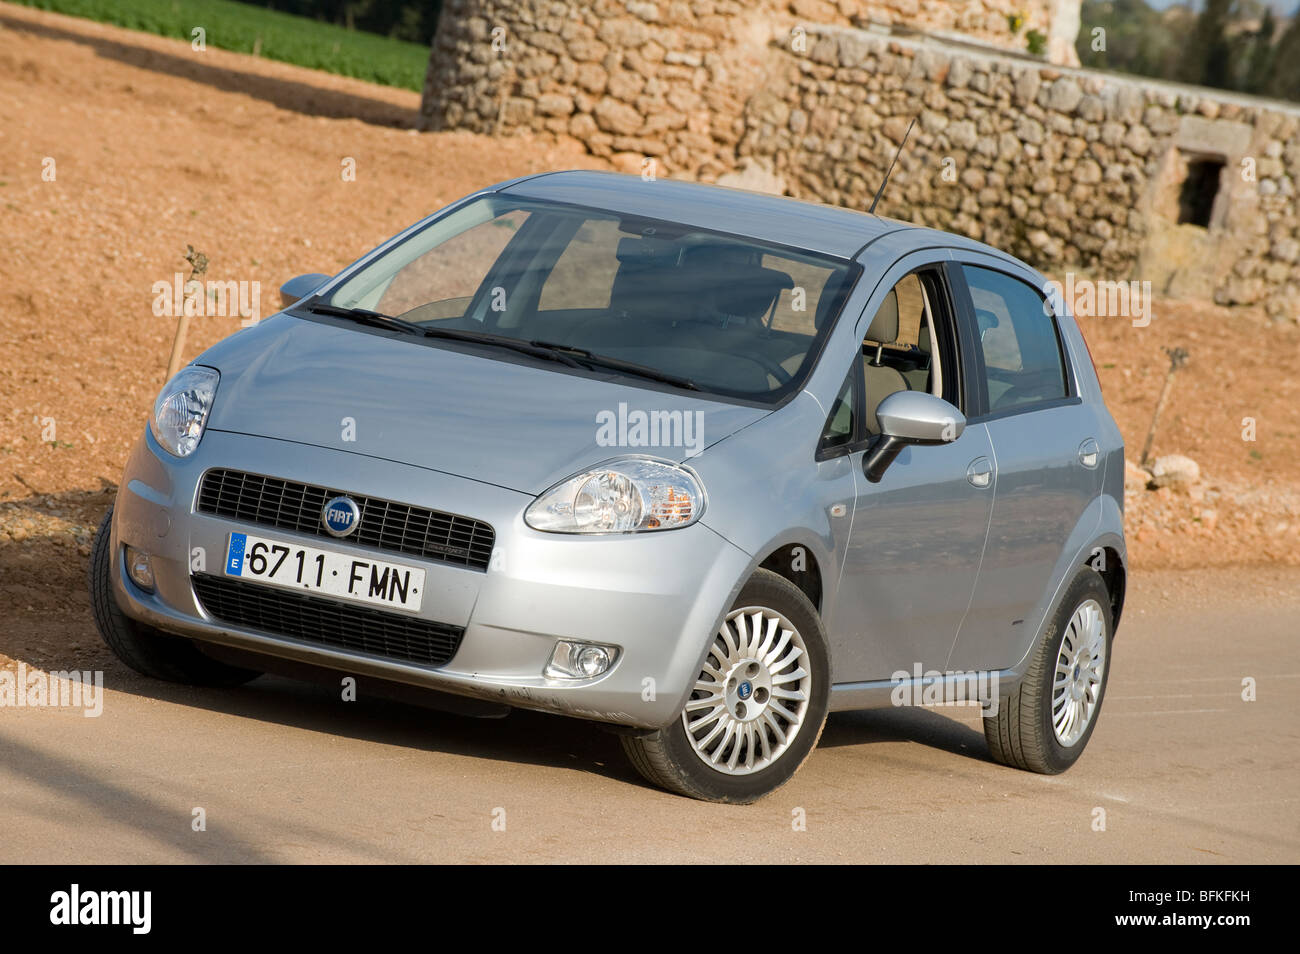 297 Fiat Punto Stock Photos, High-Res Pictures, and Images - Getty Images